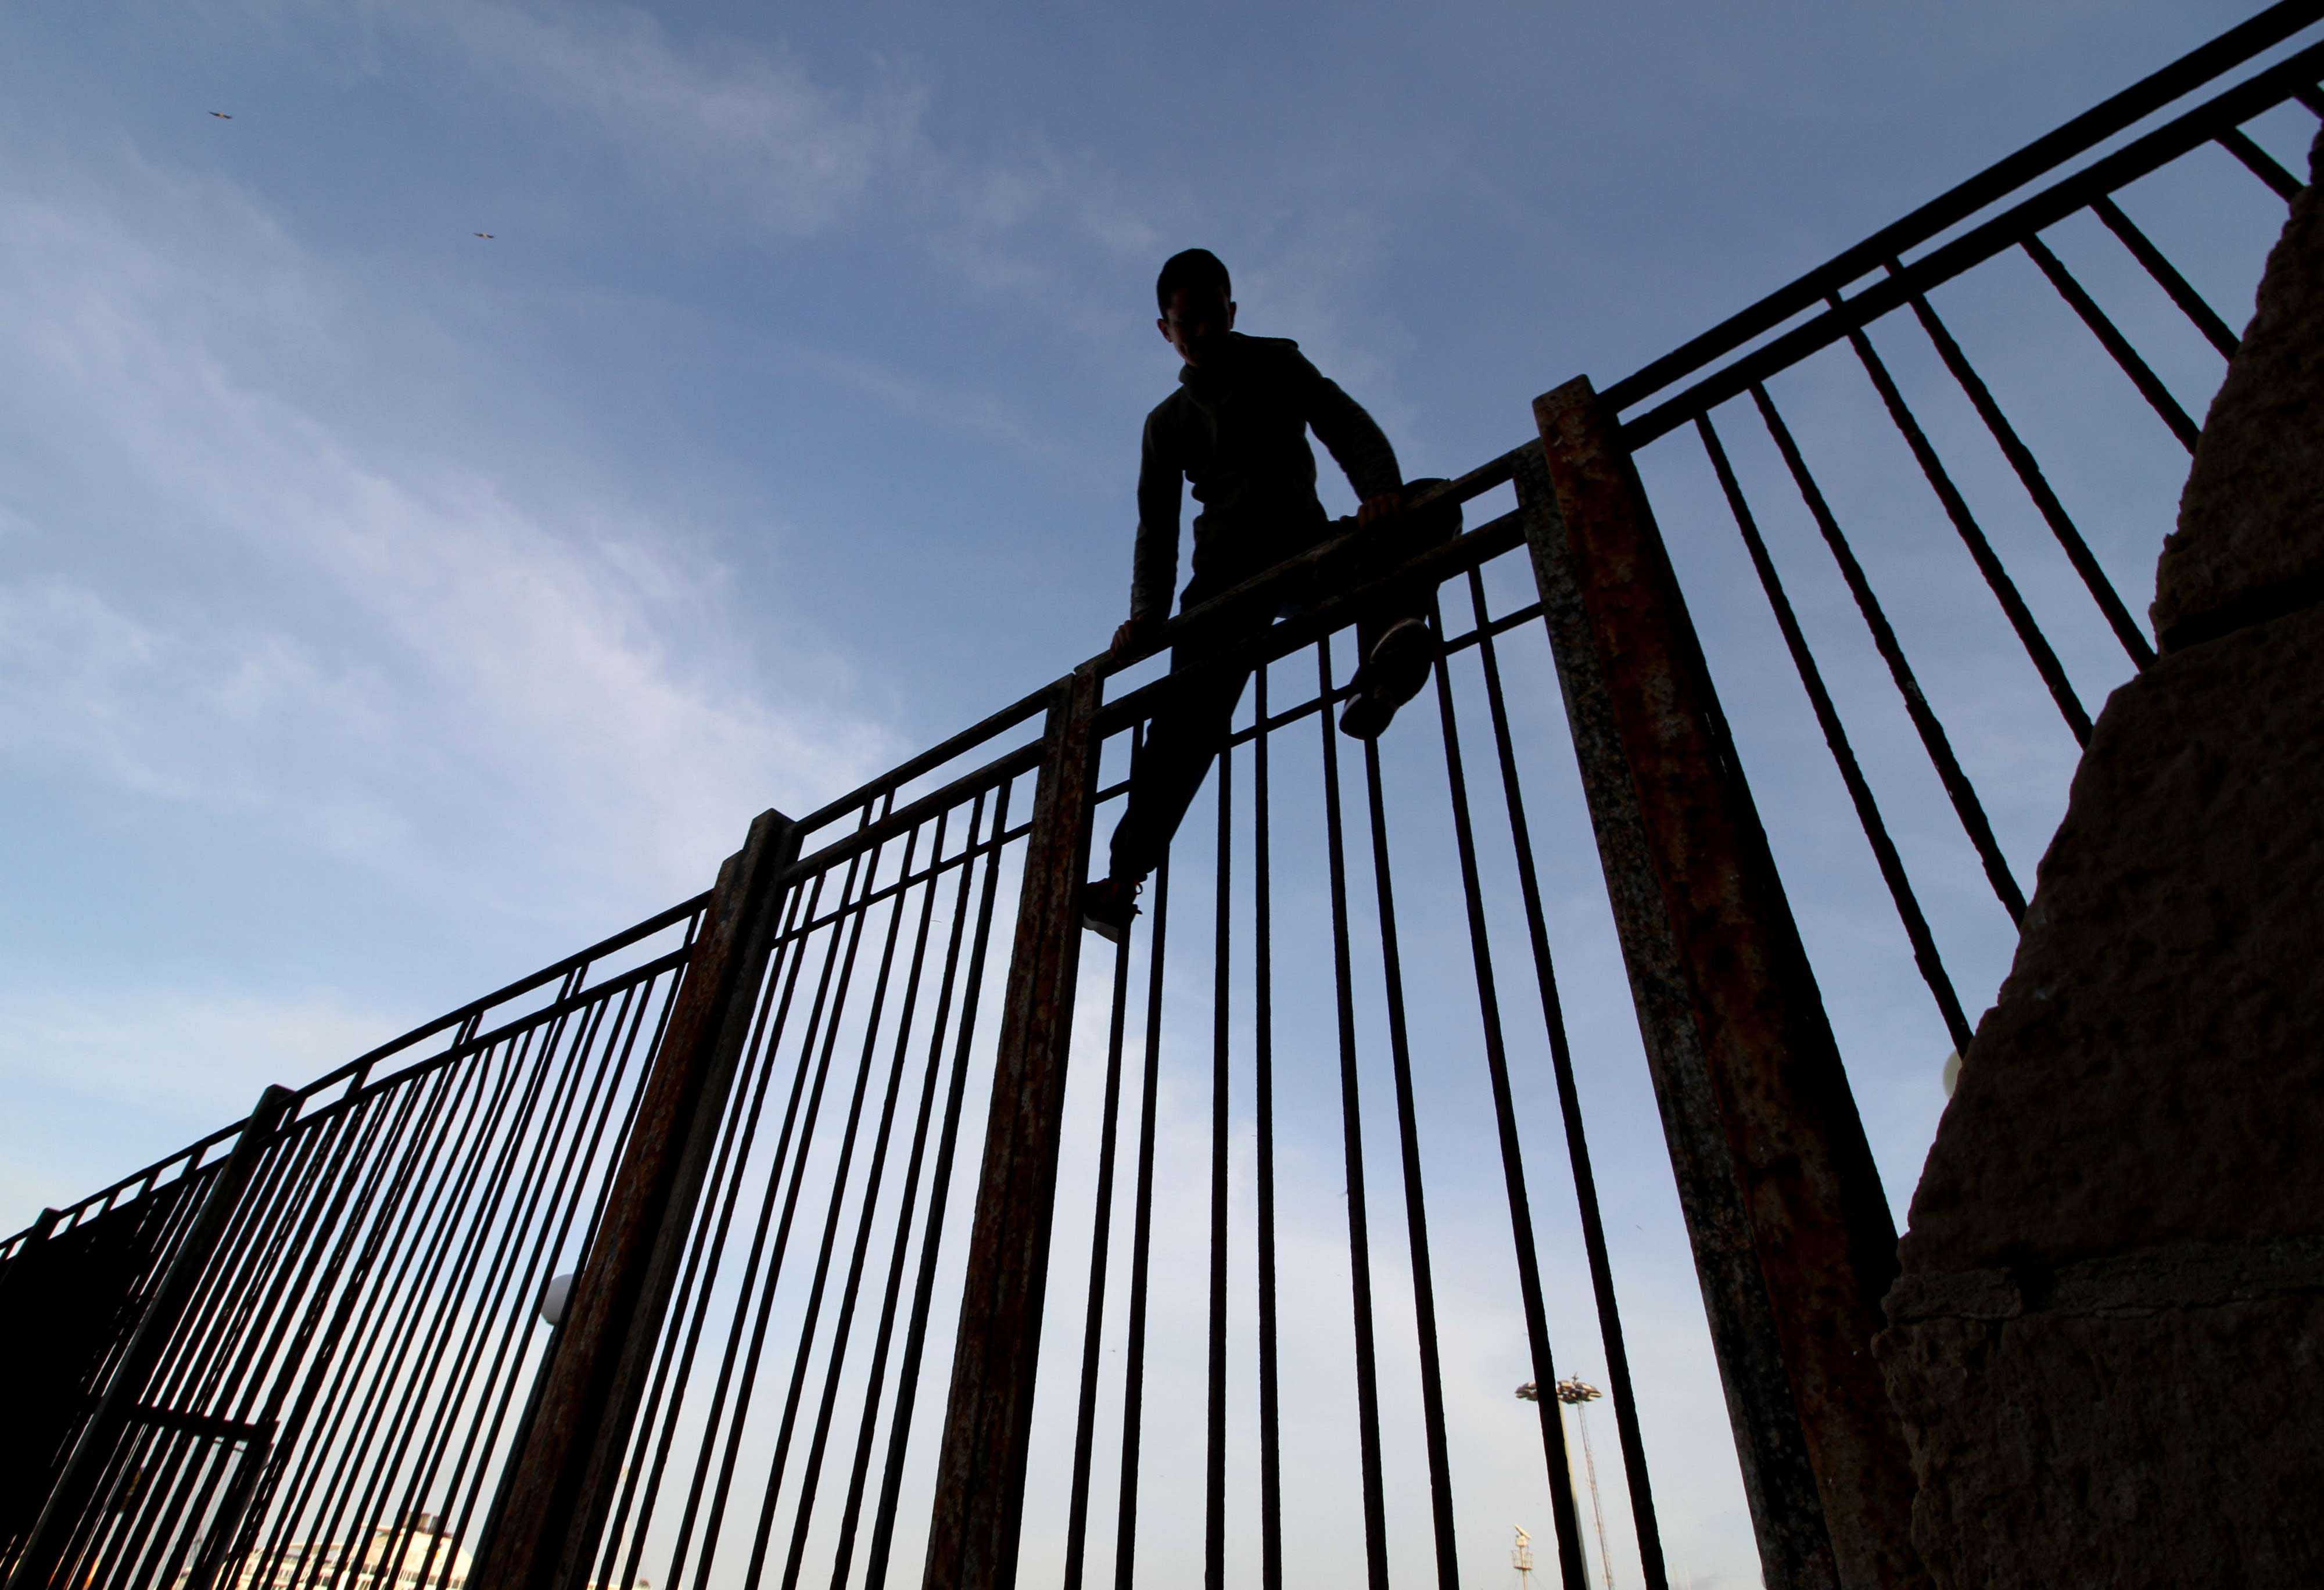 Moroccan youngster climbs a fence in the port of the Spanish enclave of Melilla bordering Morocco